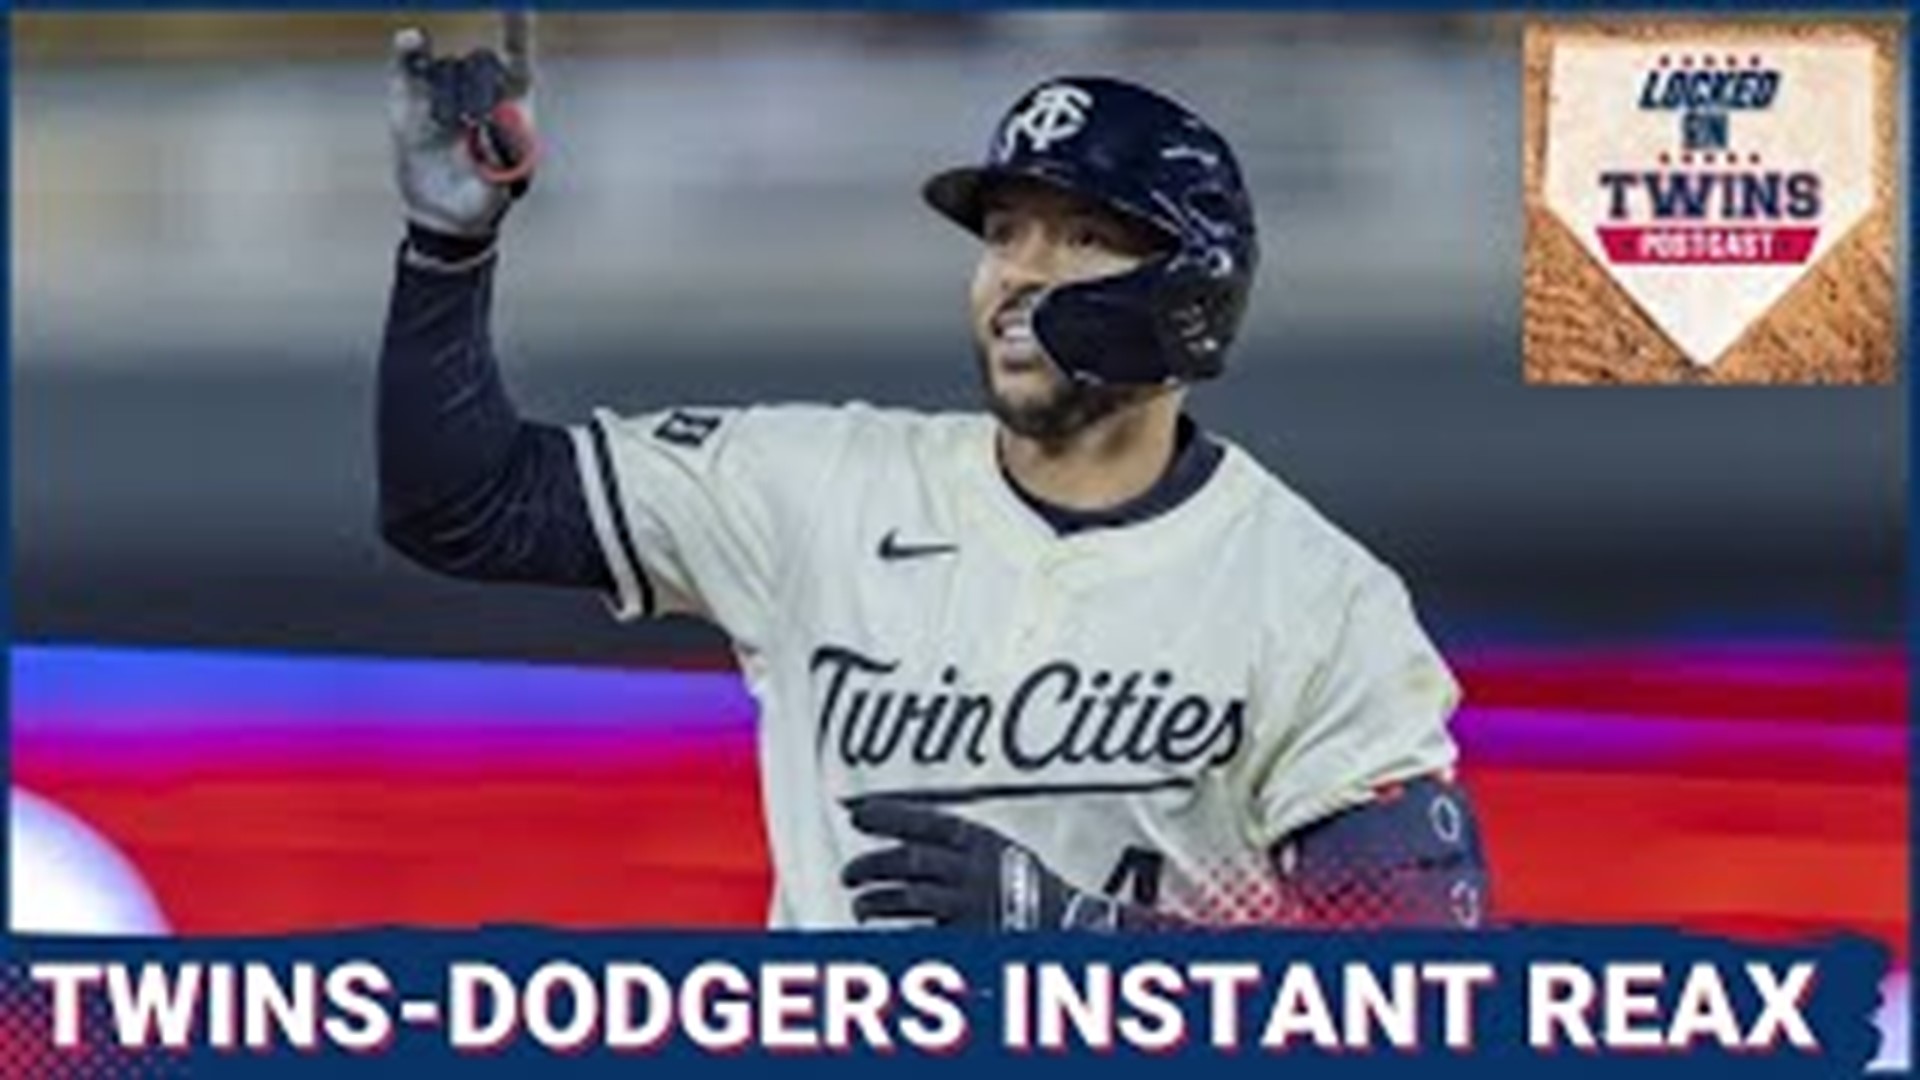 The Minnesota Twins were still in search of their first home win of the season as they hosted Shohei Ohtani and the Los Angeles Dodgers in a matinee.